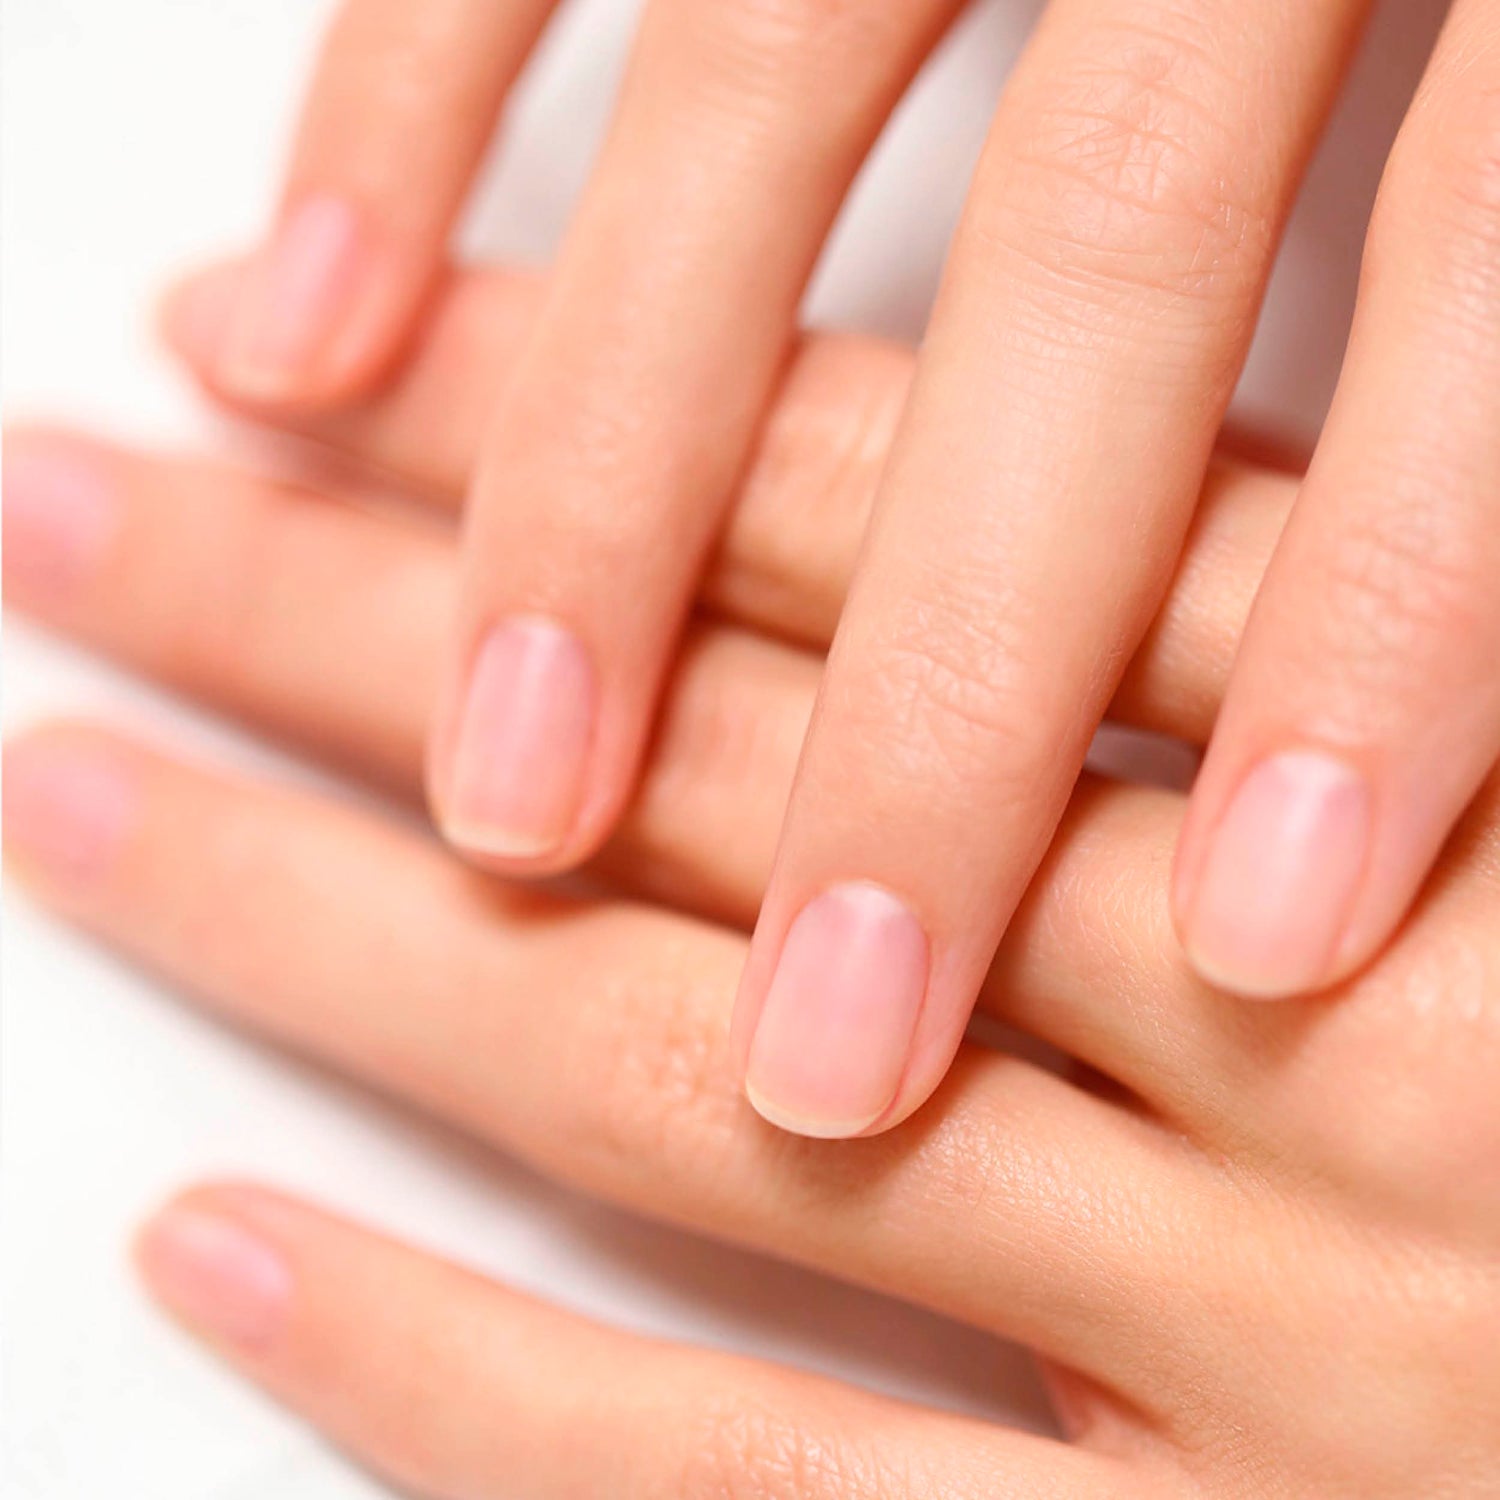 How to prep your nails like a pro